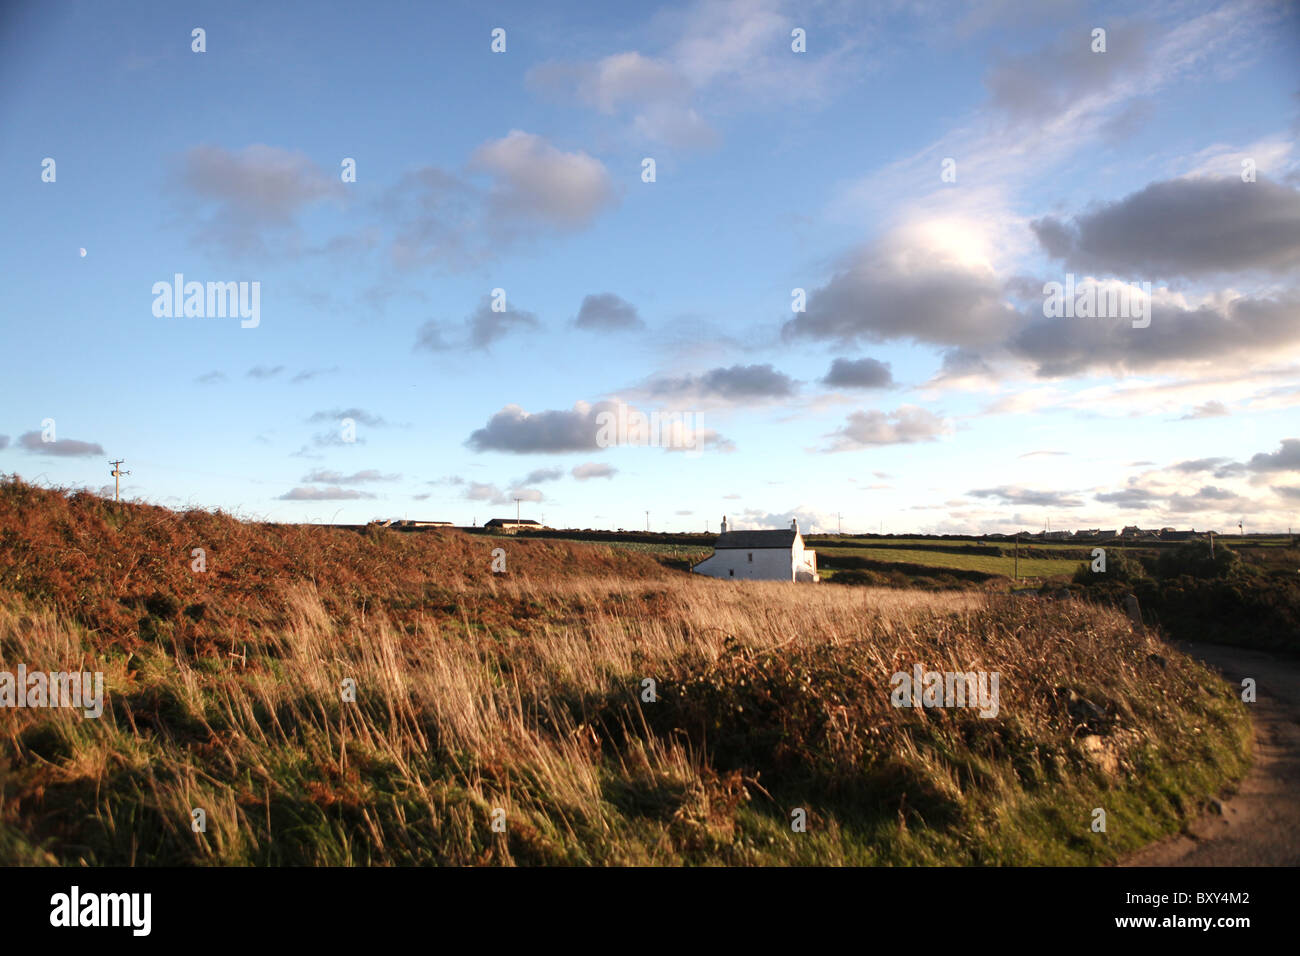 Sunset in a farming area between Nanjulian and Nanquidno in Penwith, Cornwall, England. Stock Photo